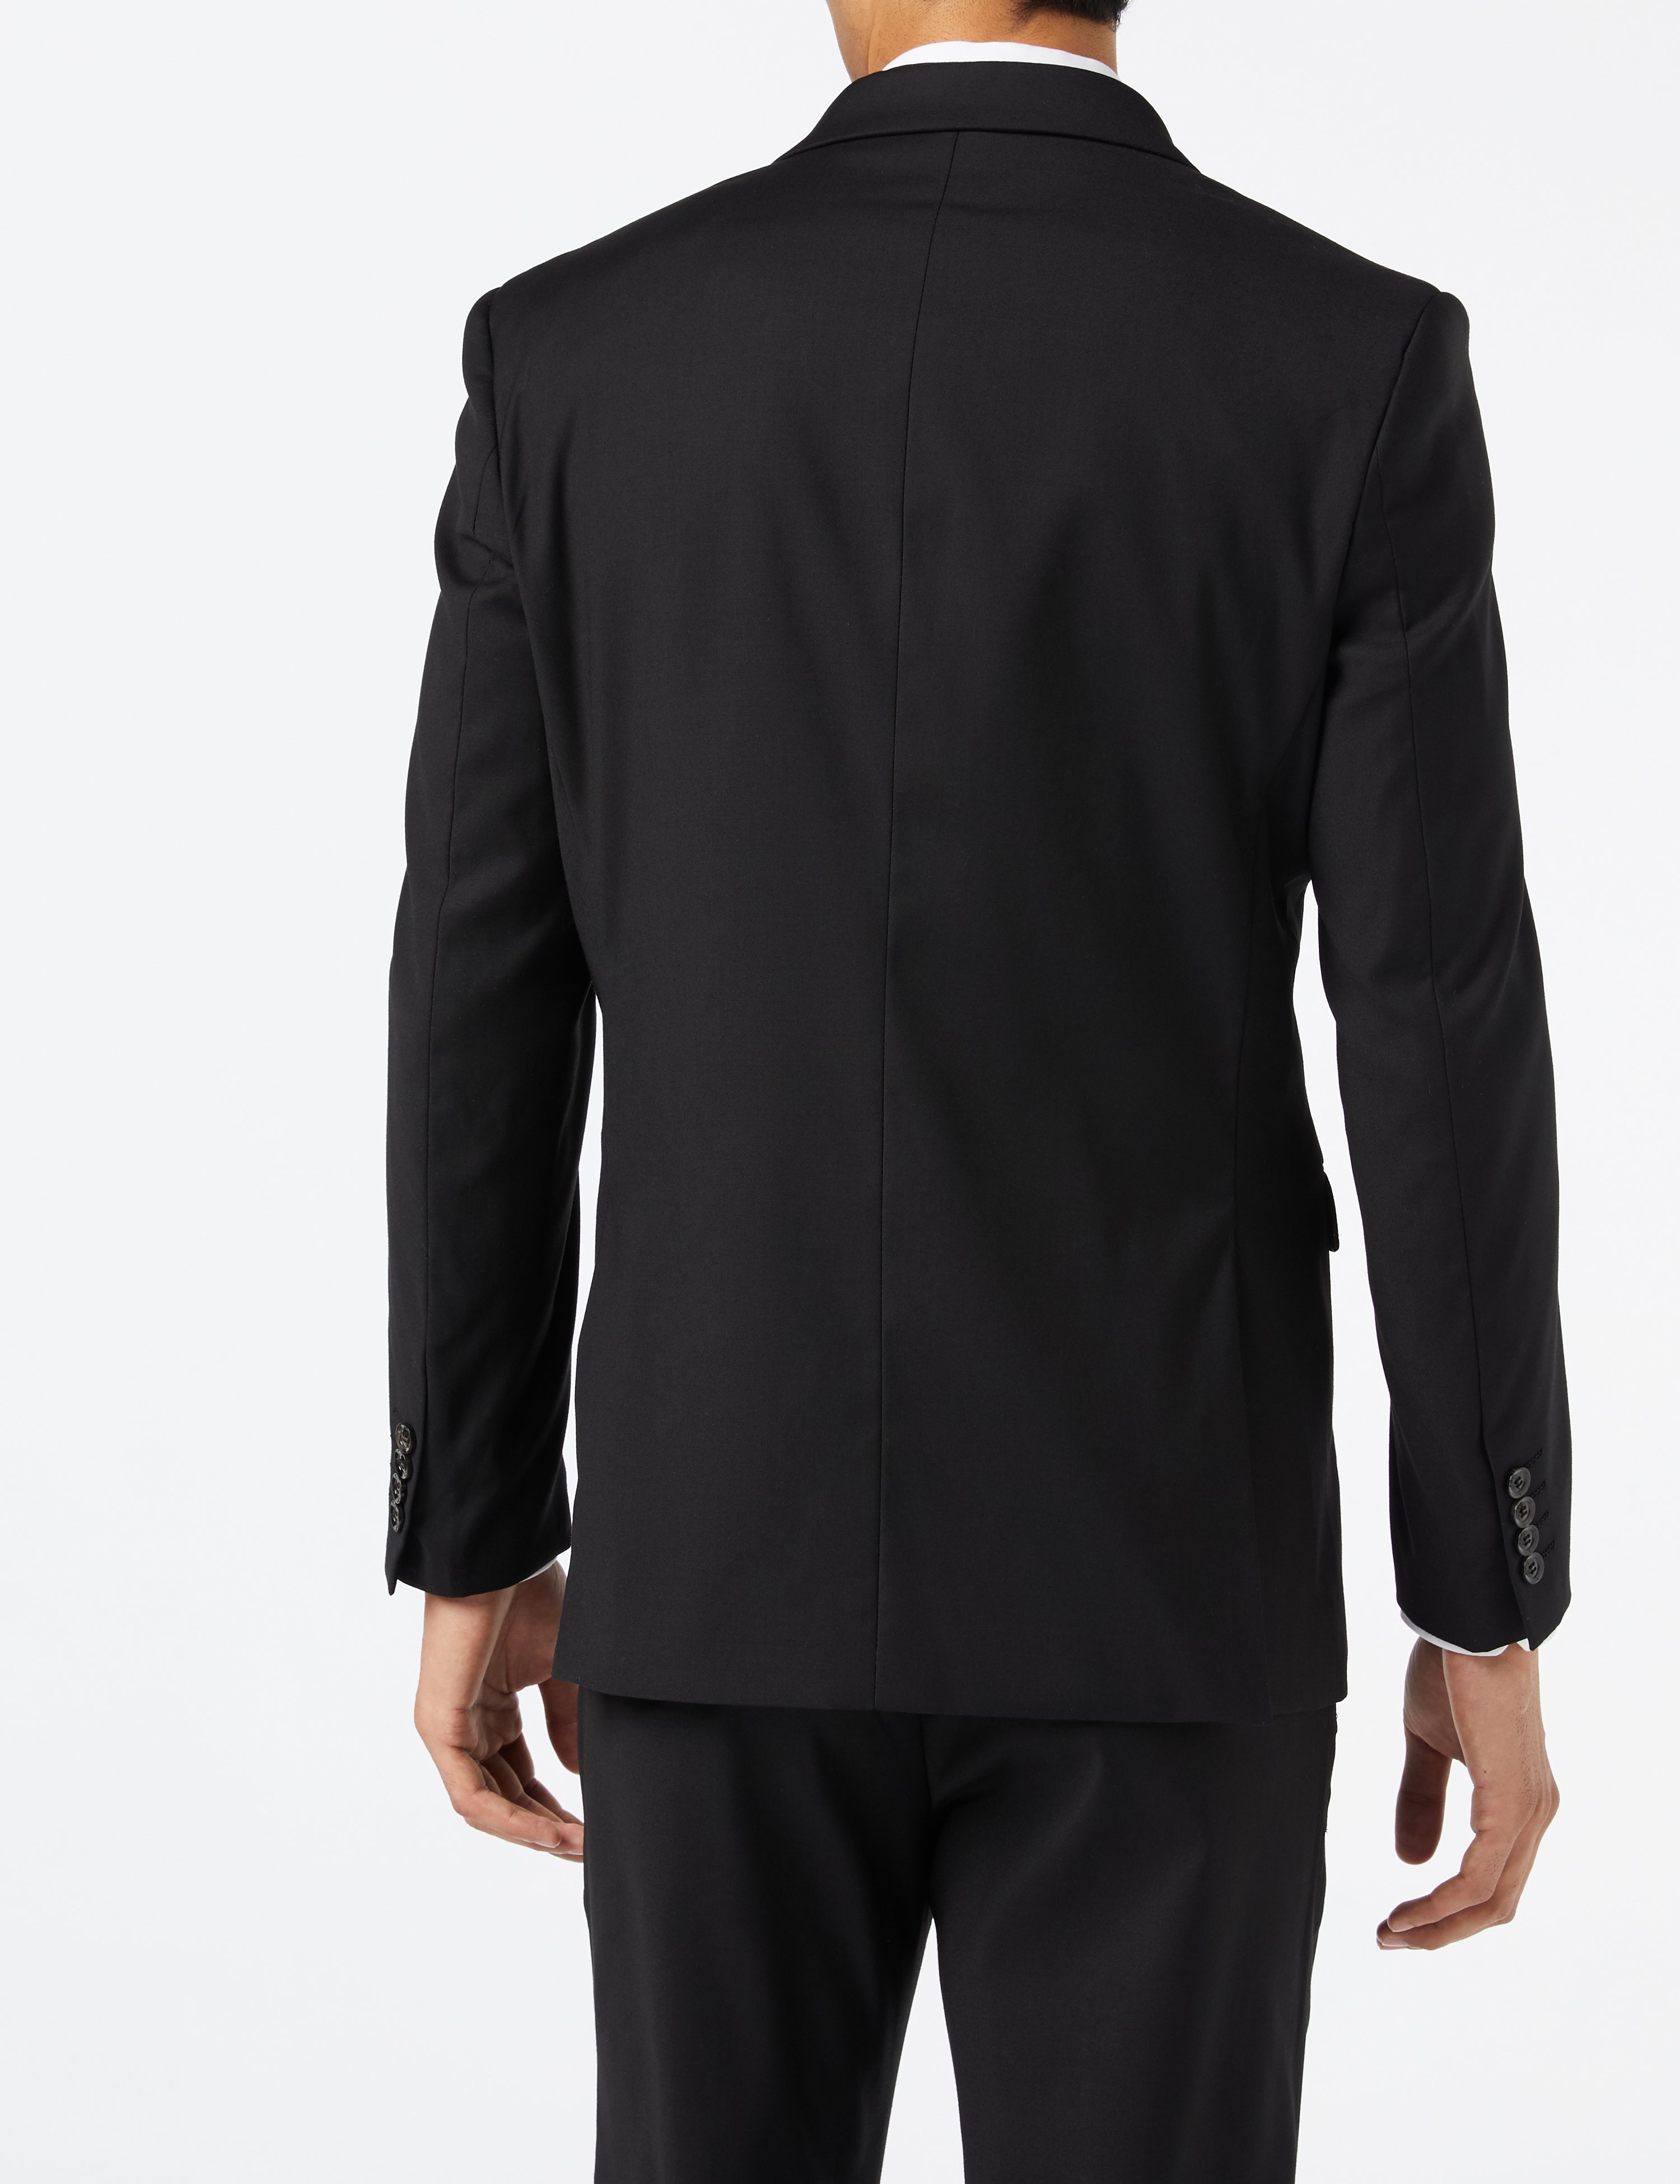 GRAHAM - BLACK SINGLE BREASTED BUSINESS SUIT